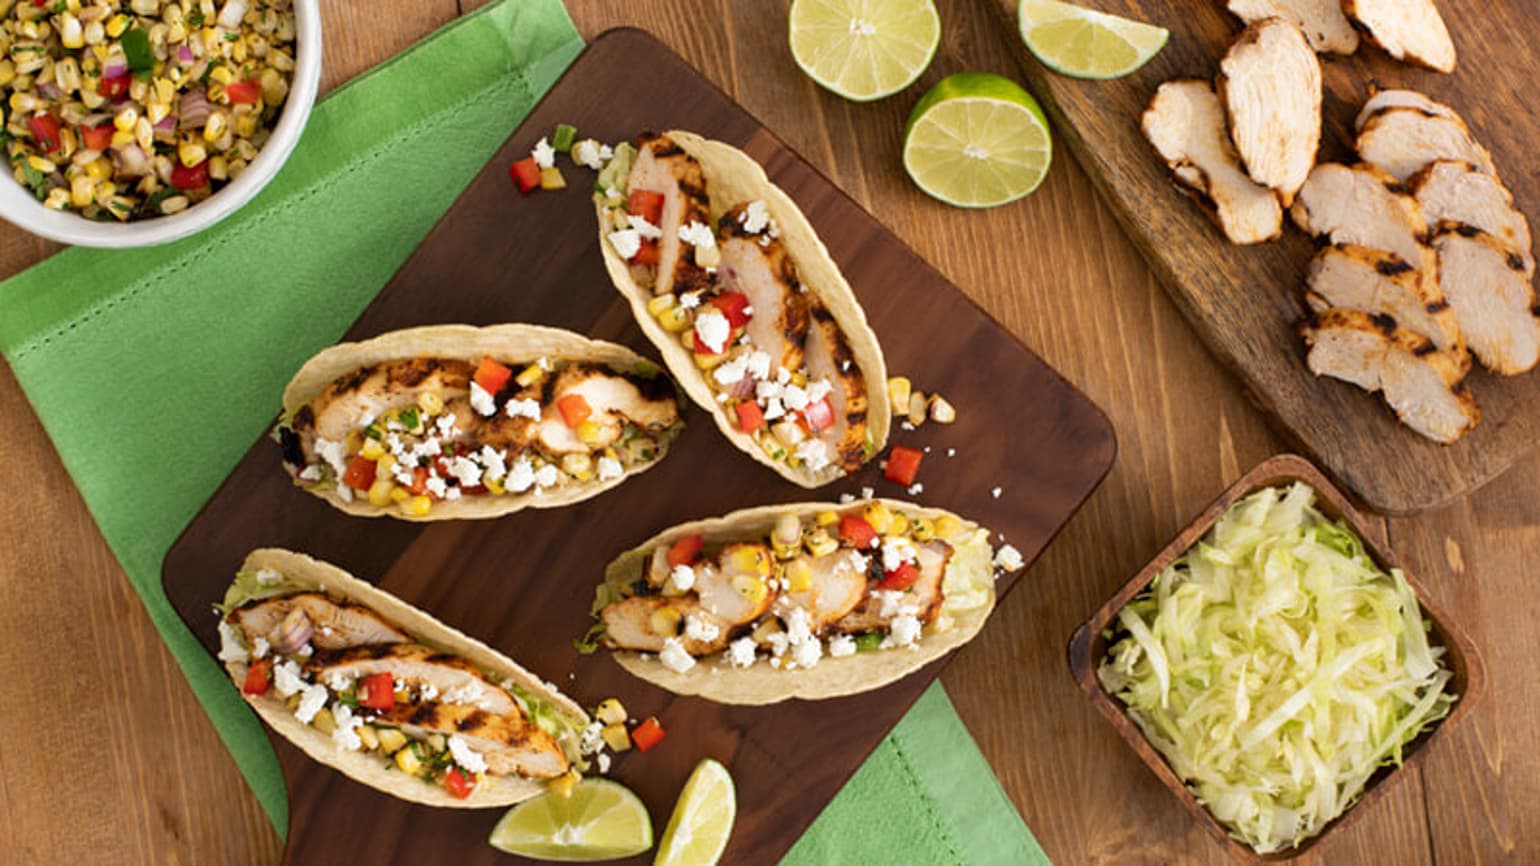 Grilled Chicken Tacos with Mexican Style Street Corn Salsa